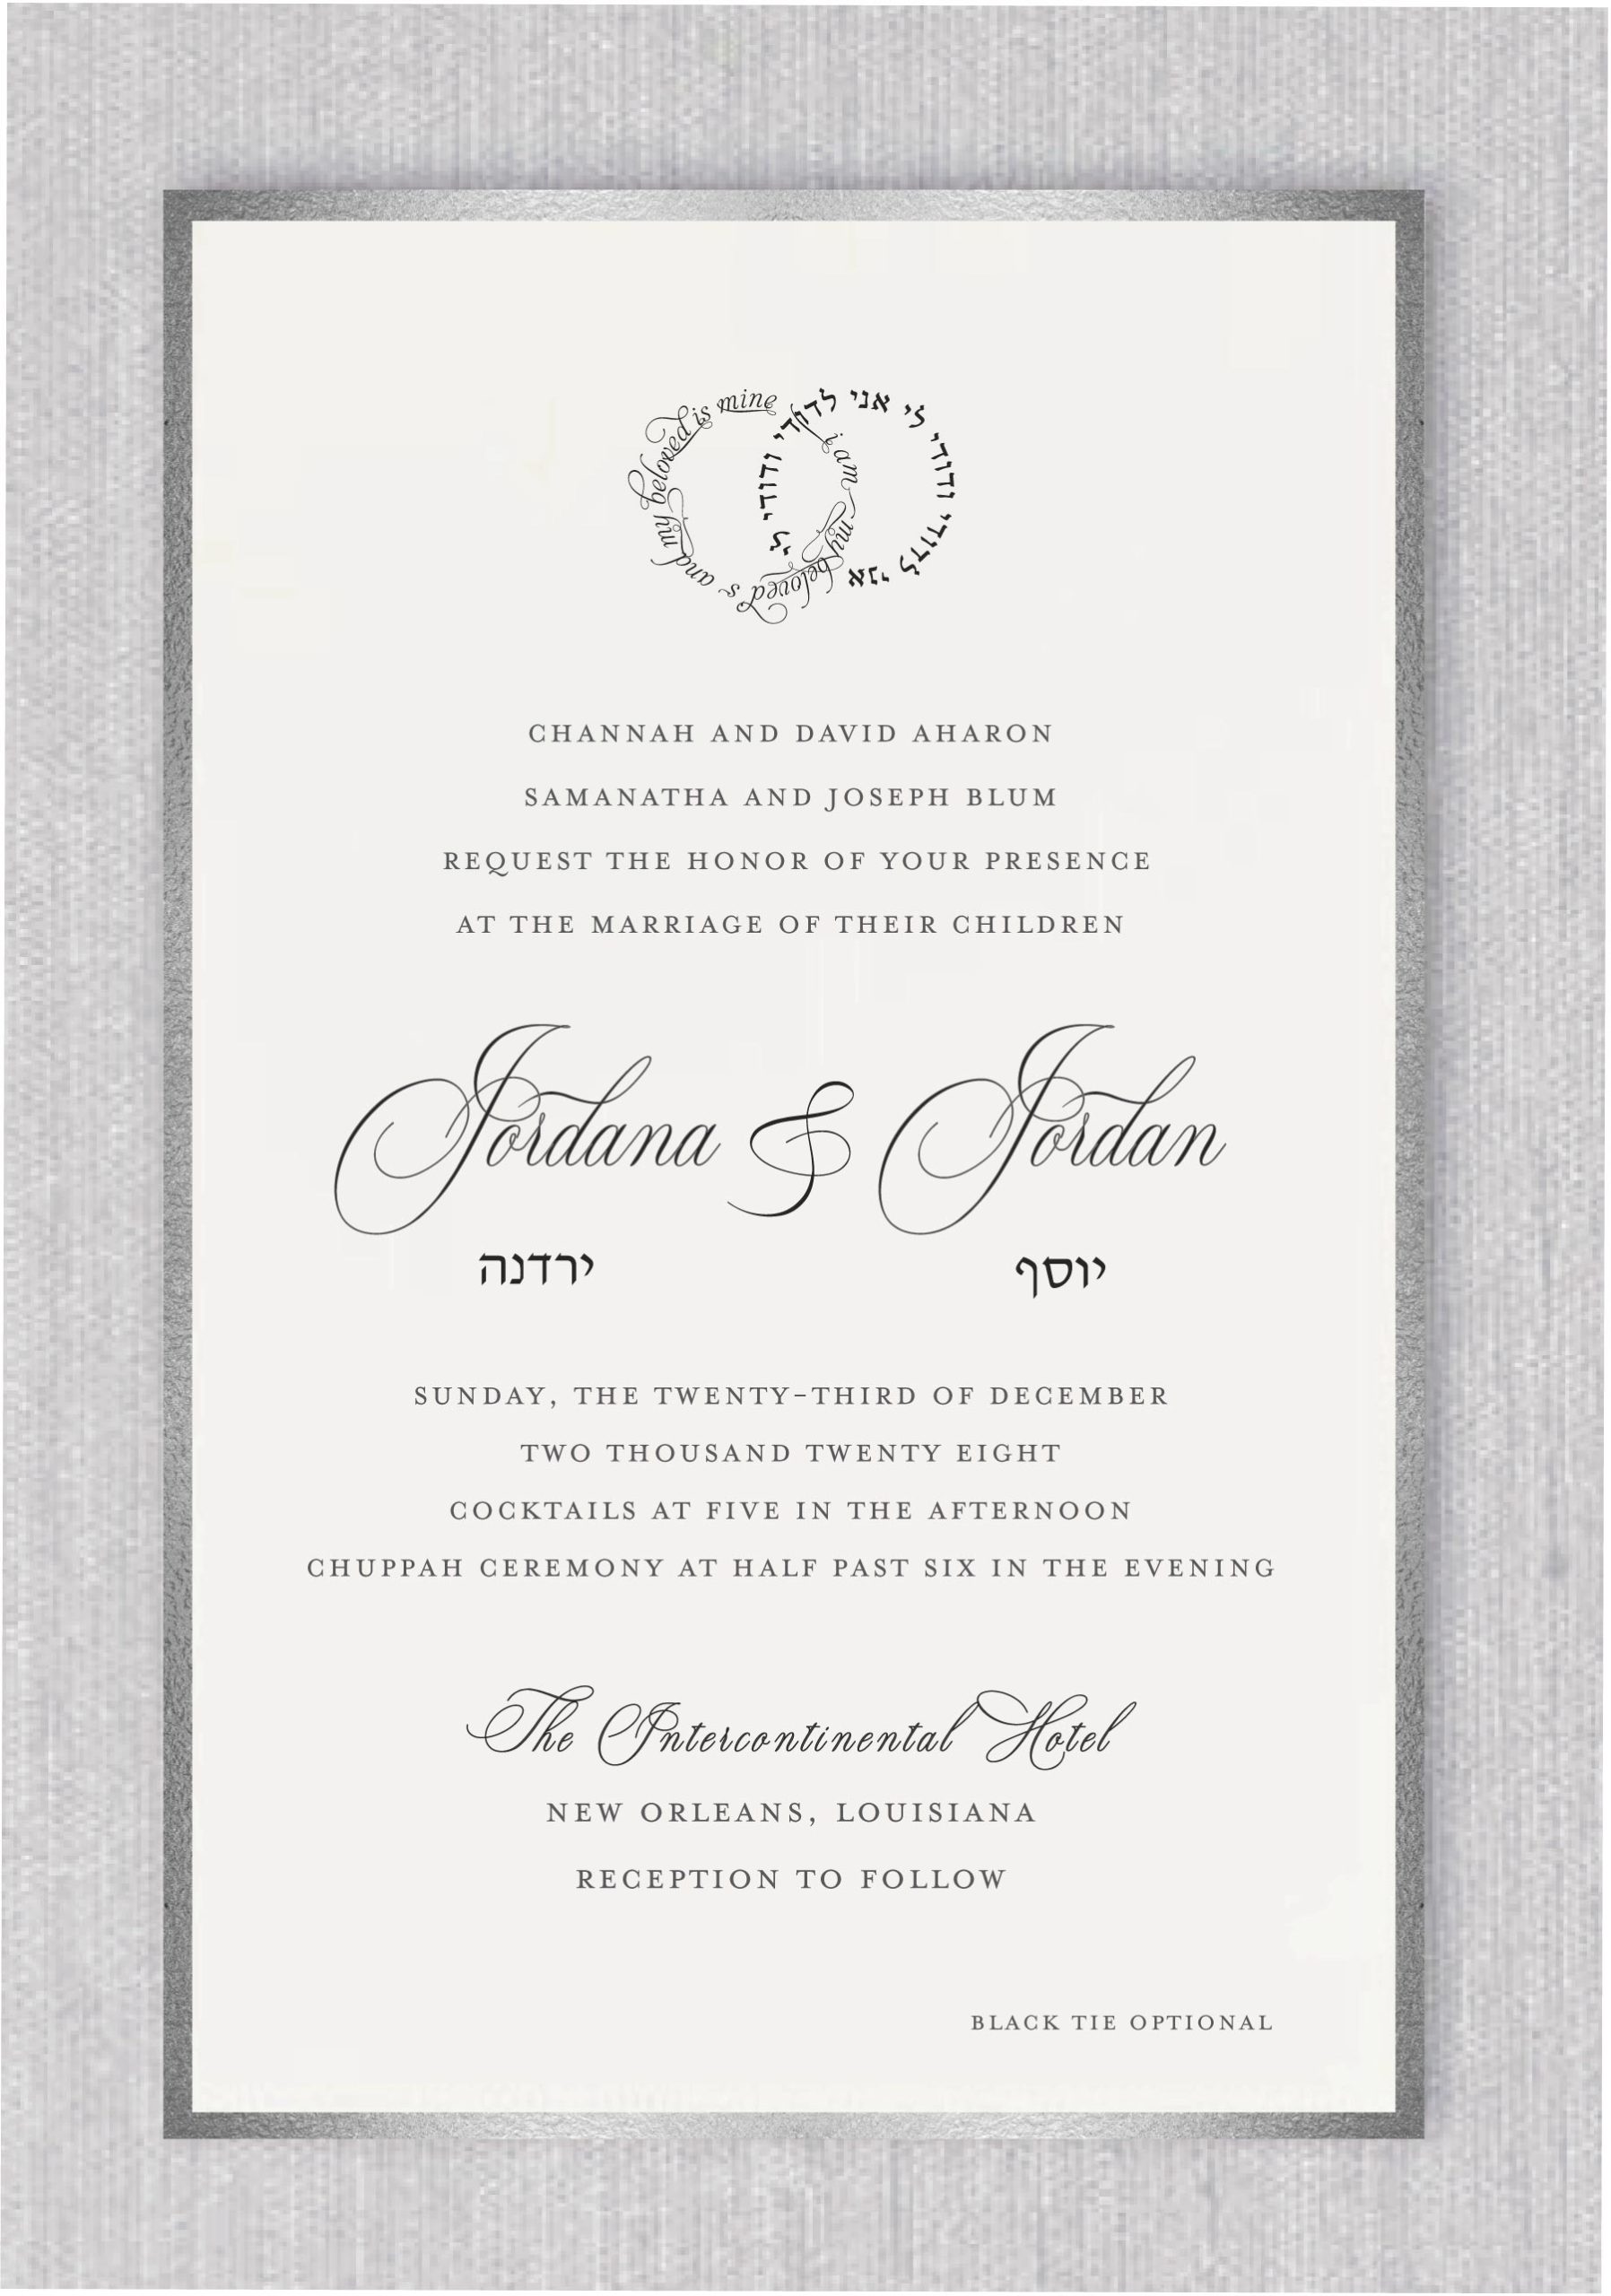 Silver Foil Frame Jewish Wedding invitation embodies the essence of 'Simplicity is Beauty.' A delicate silver foil border accentuates its elegance, making it truly stand out. At the top of the card, you'll find the phrase 'whom my soul loves' in Hebrew arch, followed by its English translation in a sophisticated font below. The names of the bride and groom are printed in elegant, fancy fonts beneath the Hebrew inscription. The inclusion of the silver foil border adds a touch of class, making this invitation both timeless and elegant.